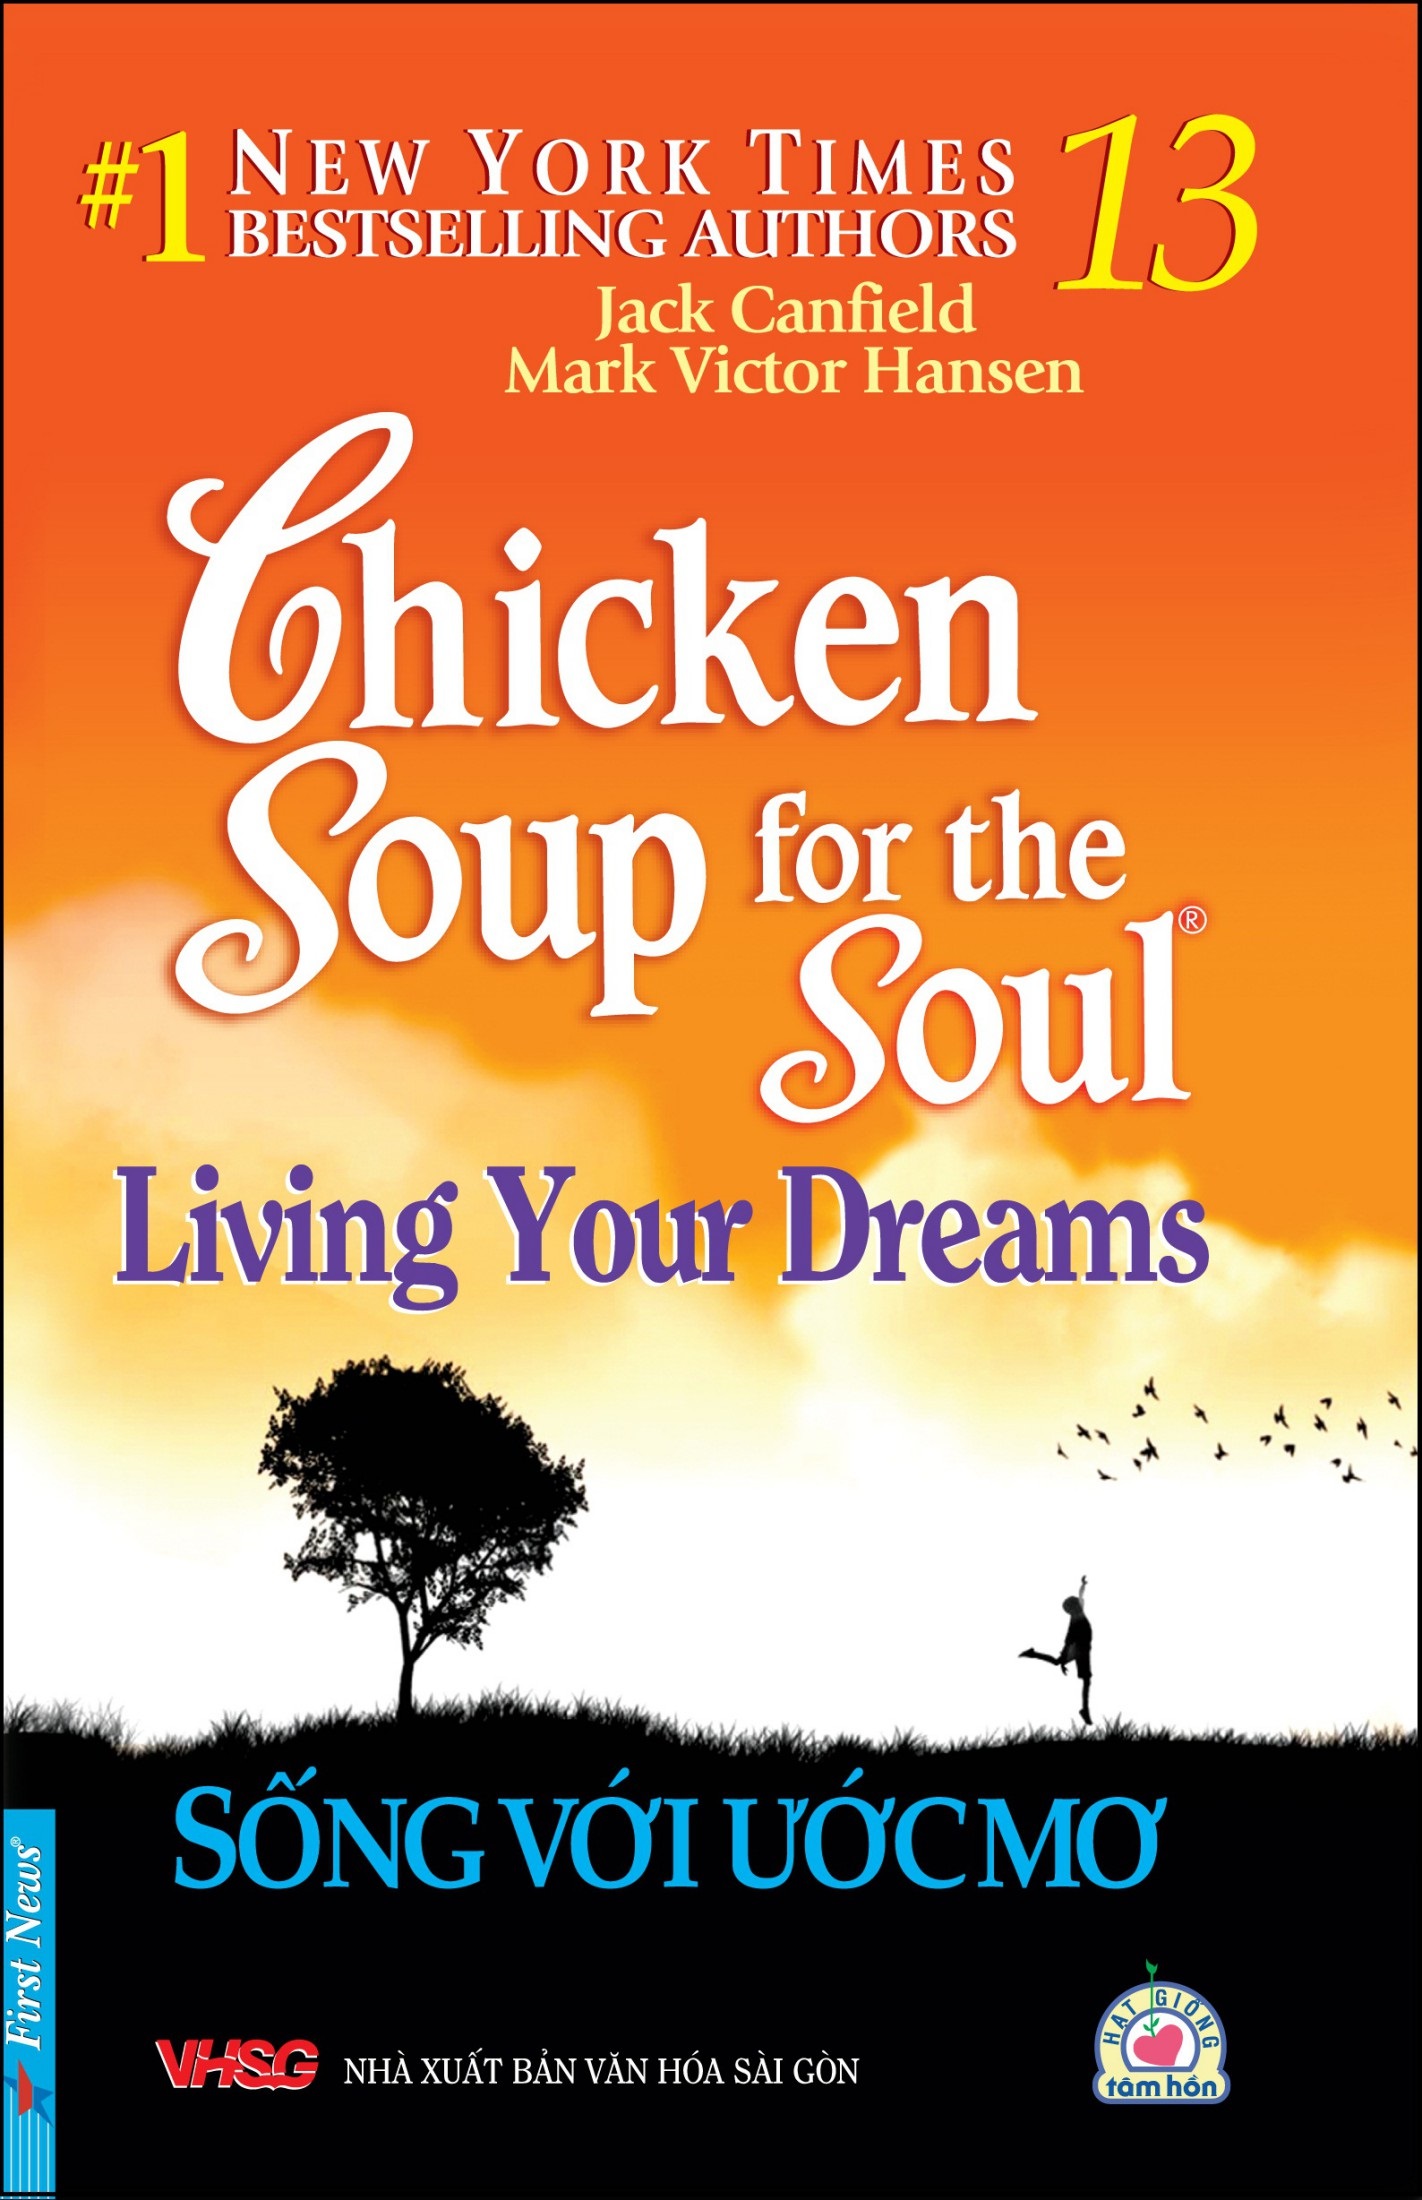 Chicken Soup for The Soul 13 - Jack Canfiel & Mark Victor Hansen